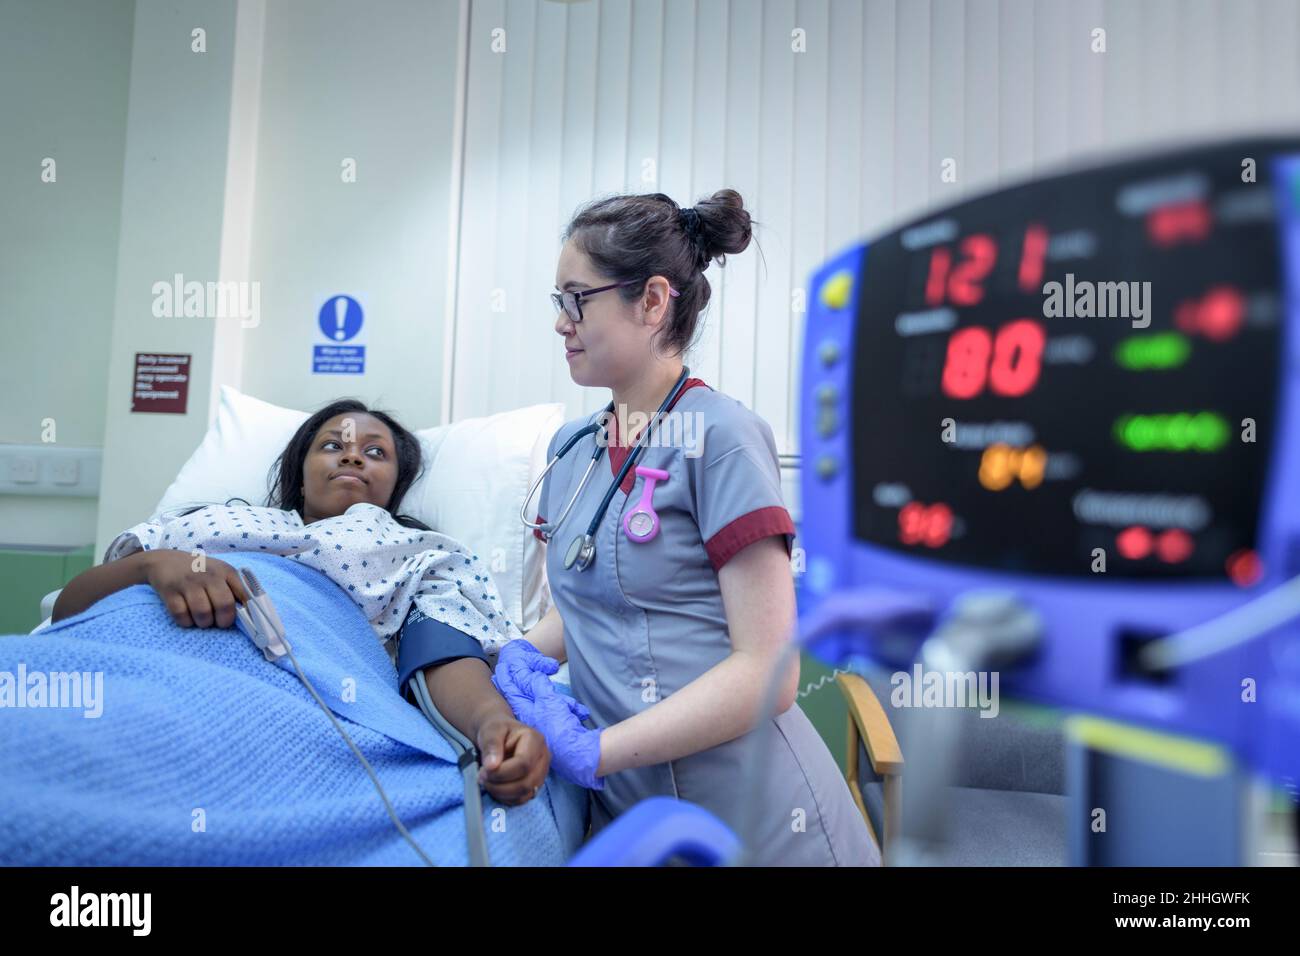 Nurse checking patients blood pressure on hospital ward Stock Photo